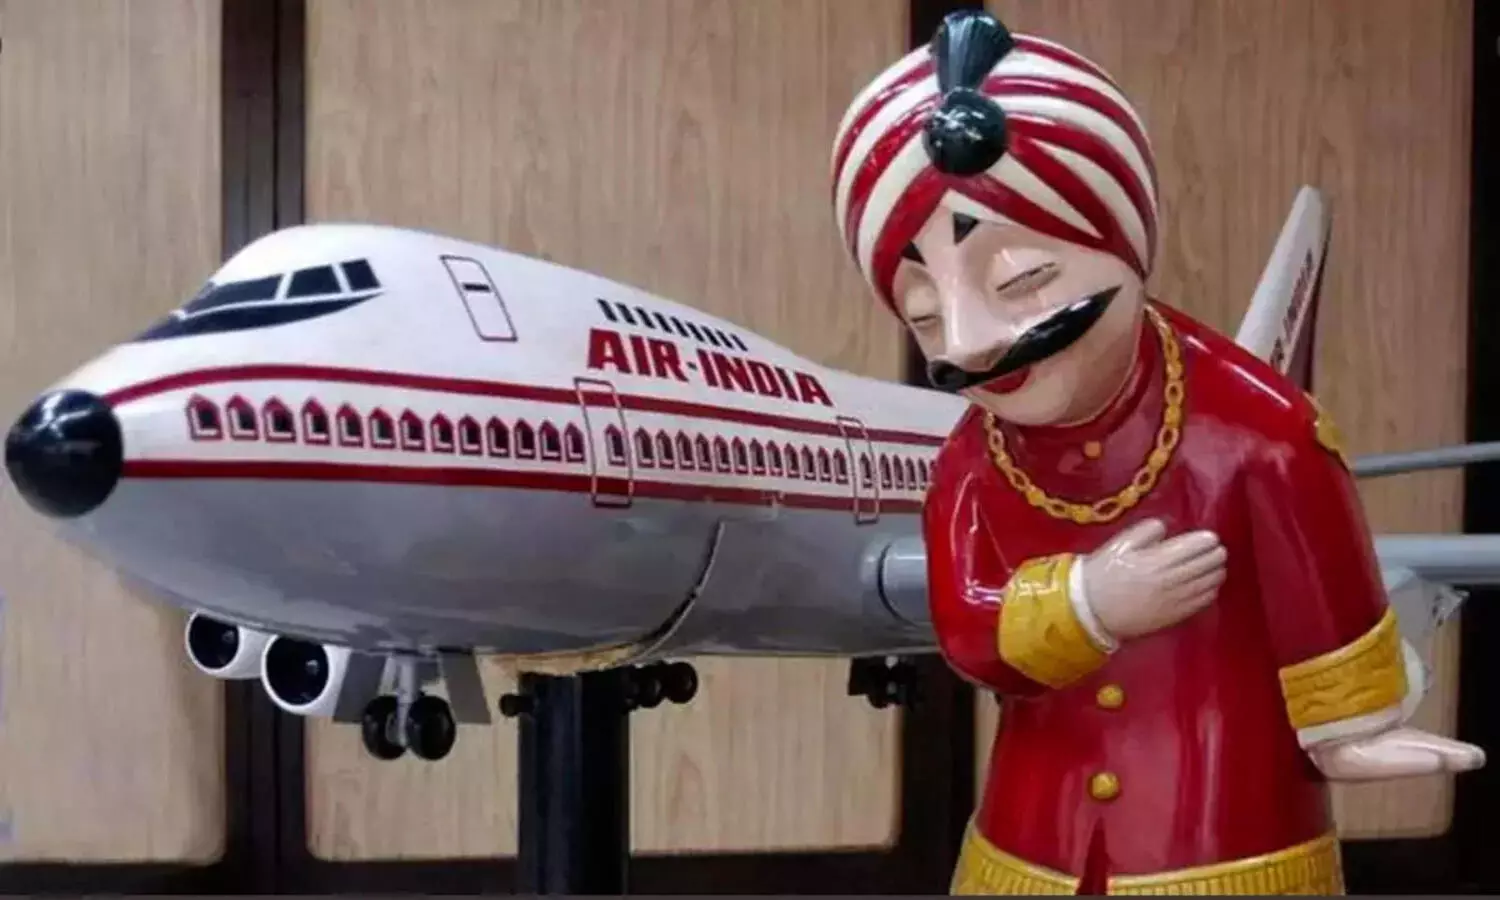 Its Official: Air India handed over to Tata Group, Maharaja comes home after 69 years